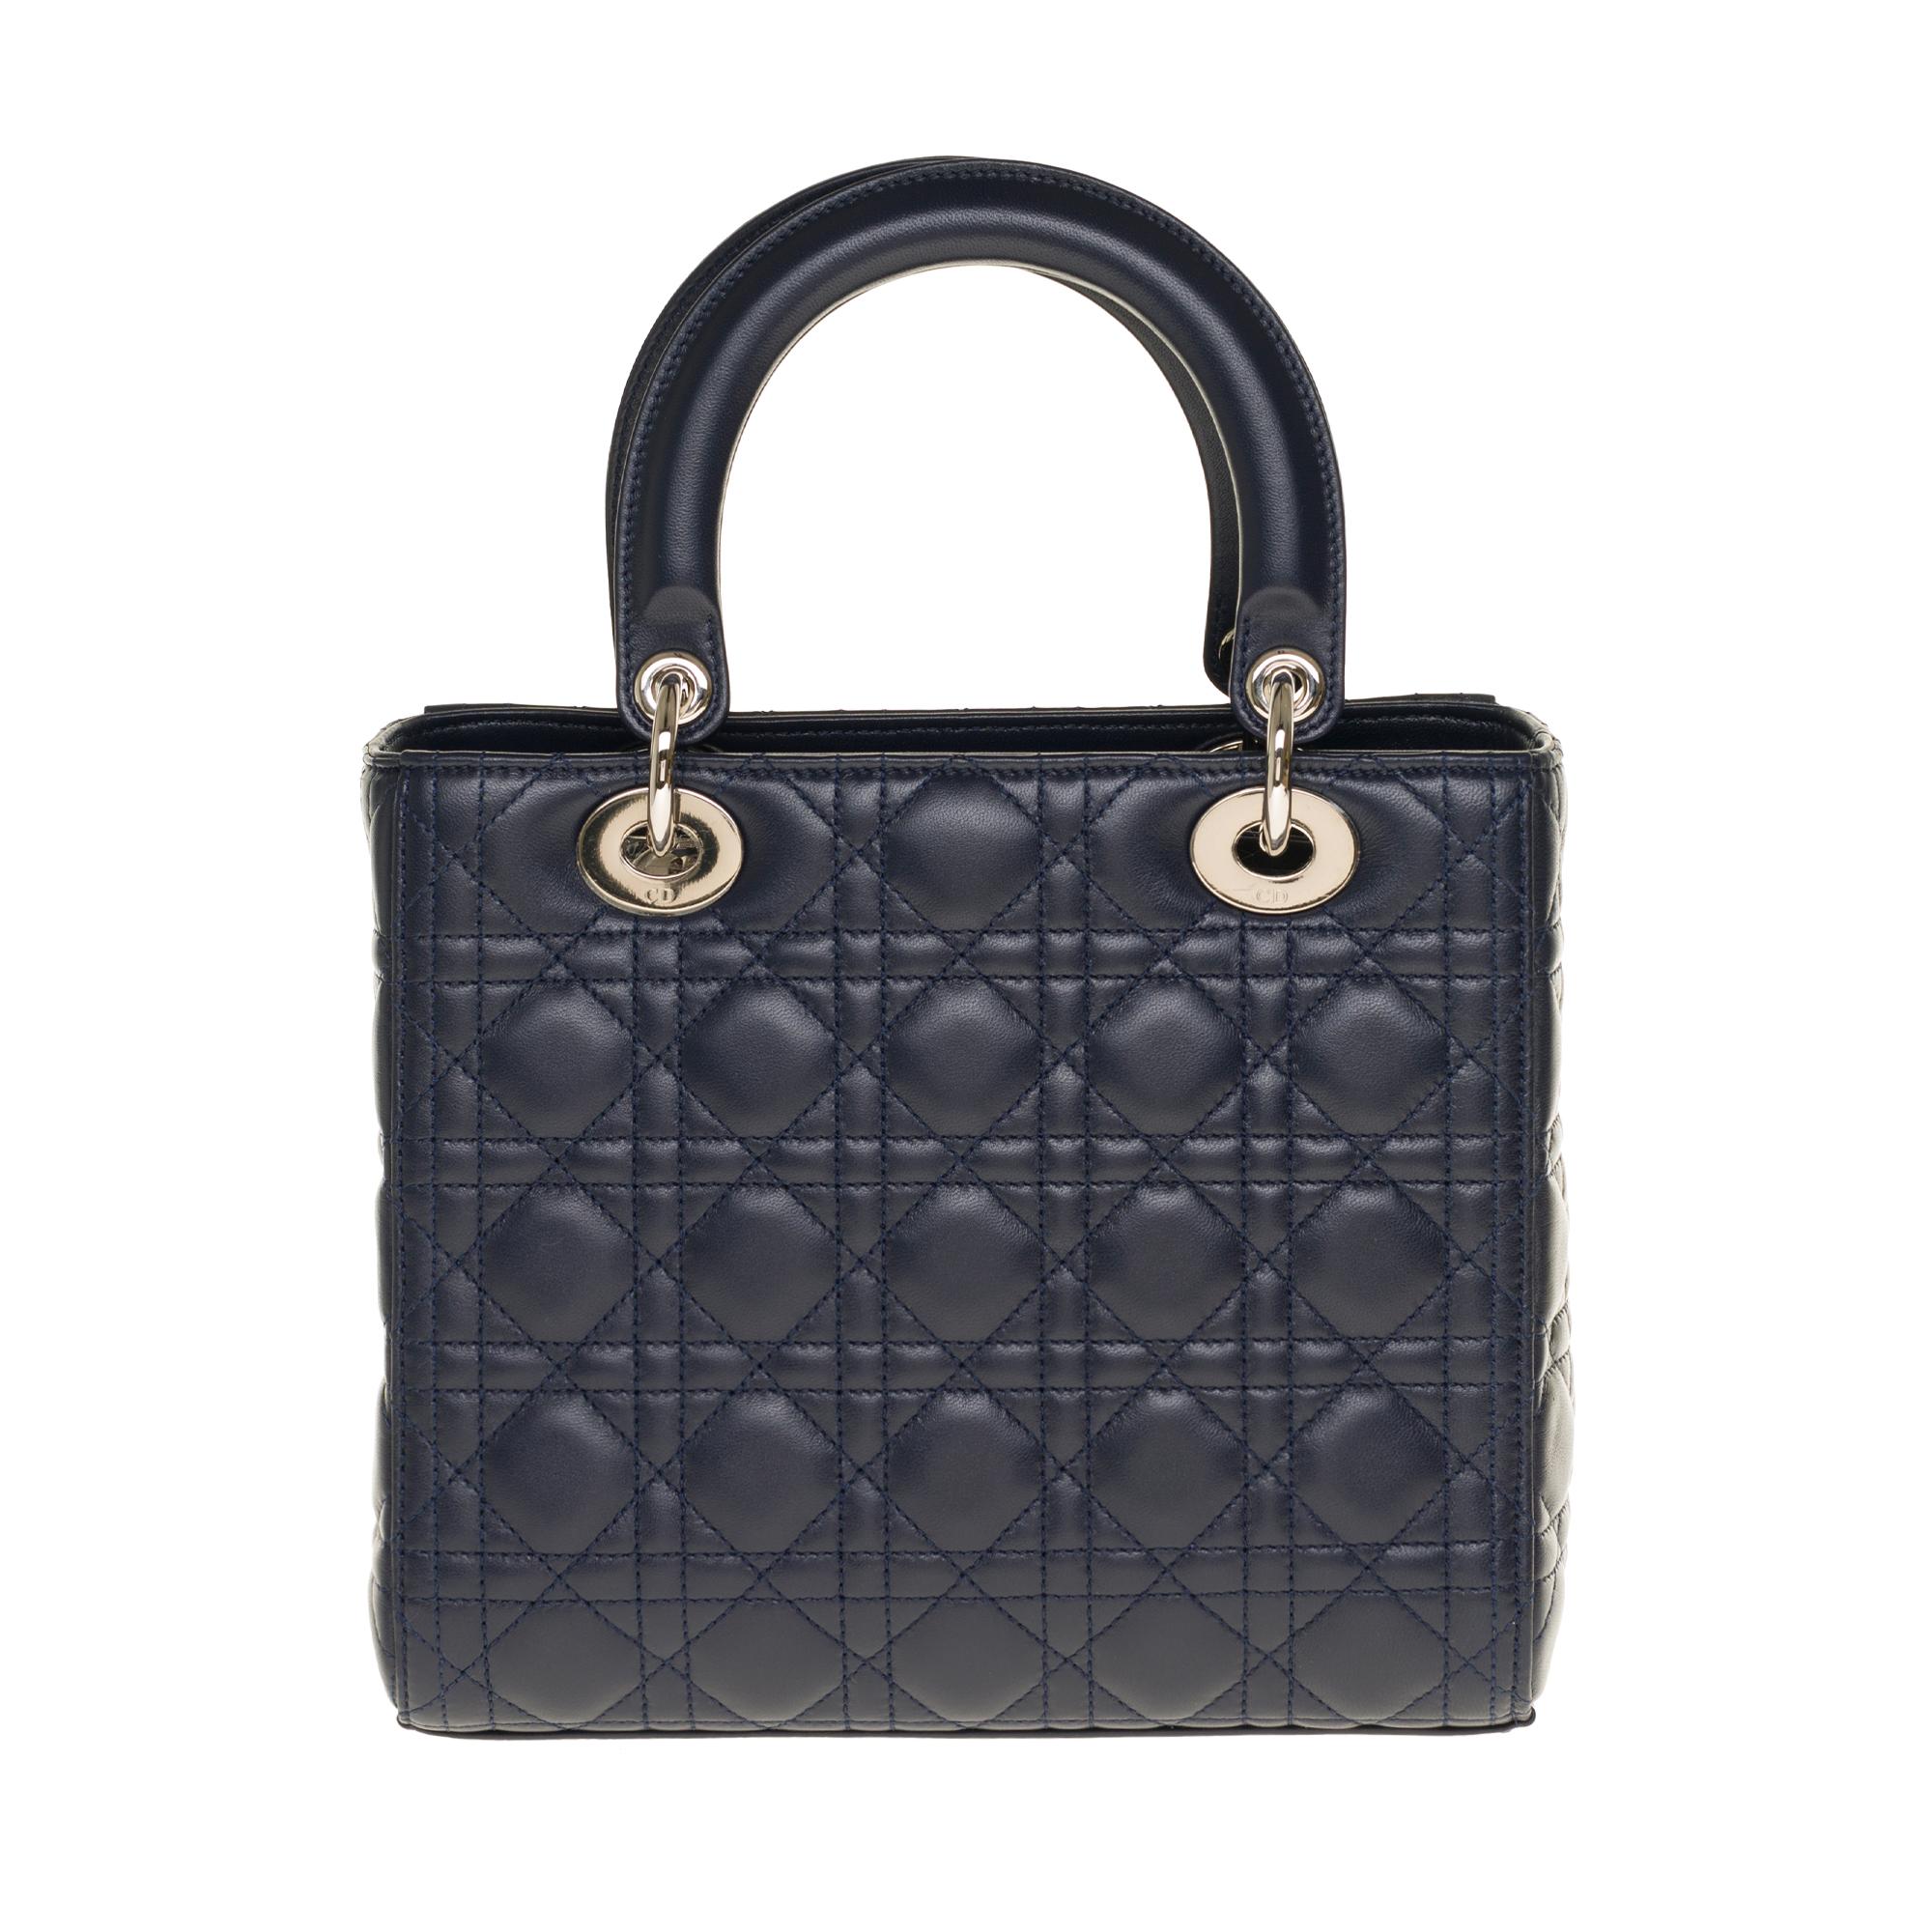 The very Classy shoulder bag Dior Lady Dior medium model in blue navy cannage leather, silver metal trim, double handle in blue leather, removable shoulder strap handle in blue leather allowing a hand or shoulder support or shoulder strap.

It’s a